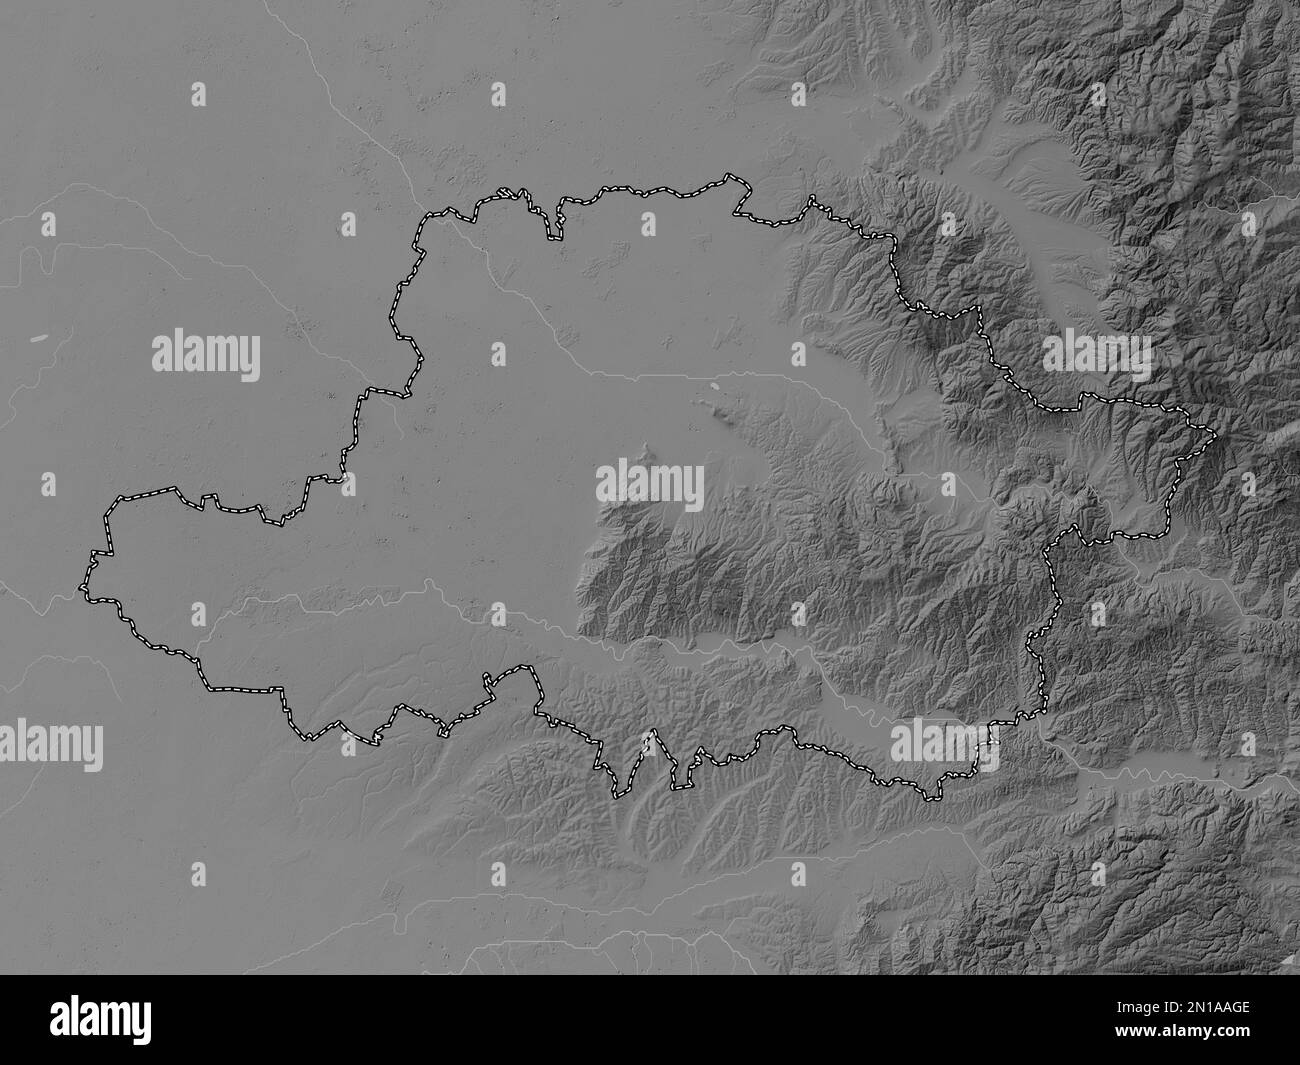 Arad, county of Romania. Grayscale elevation map with lakes and rivers Stock Photo